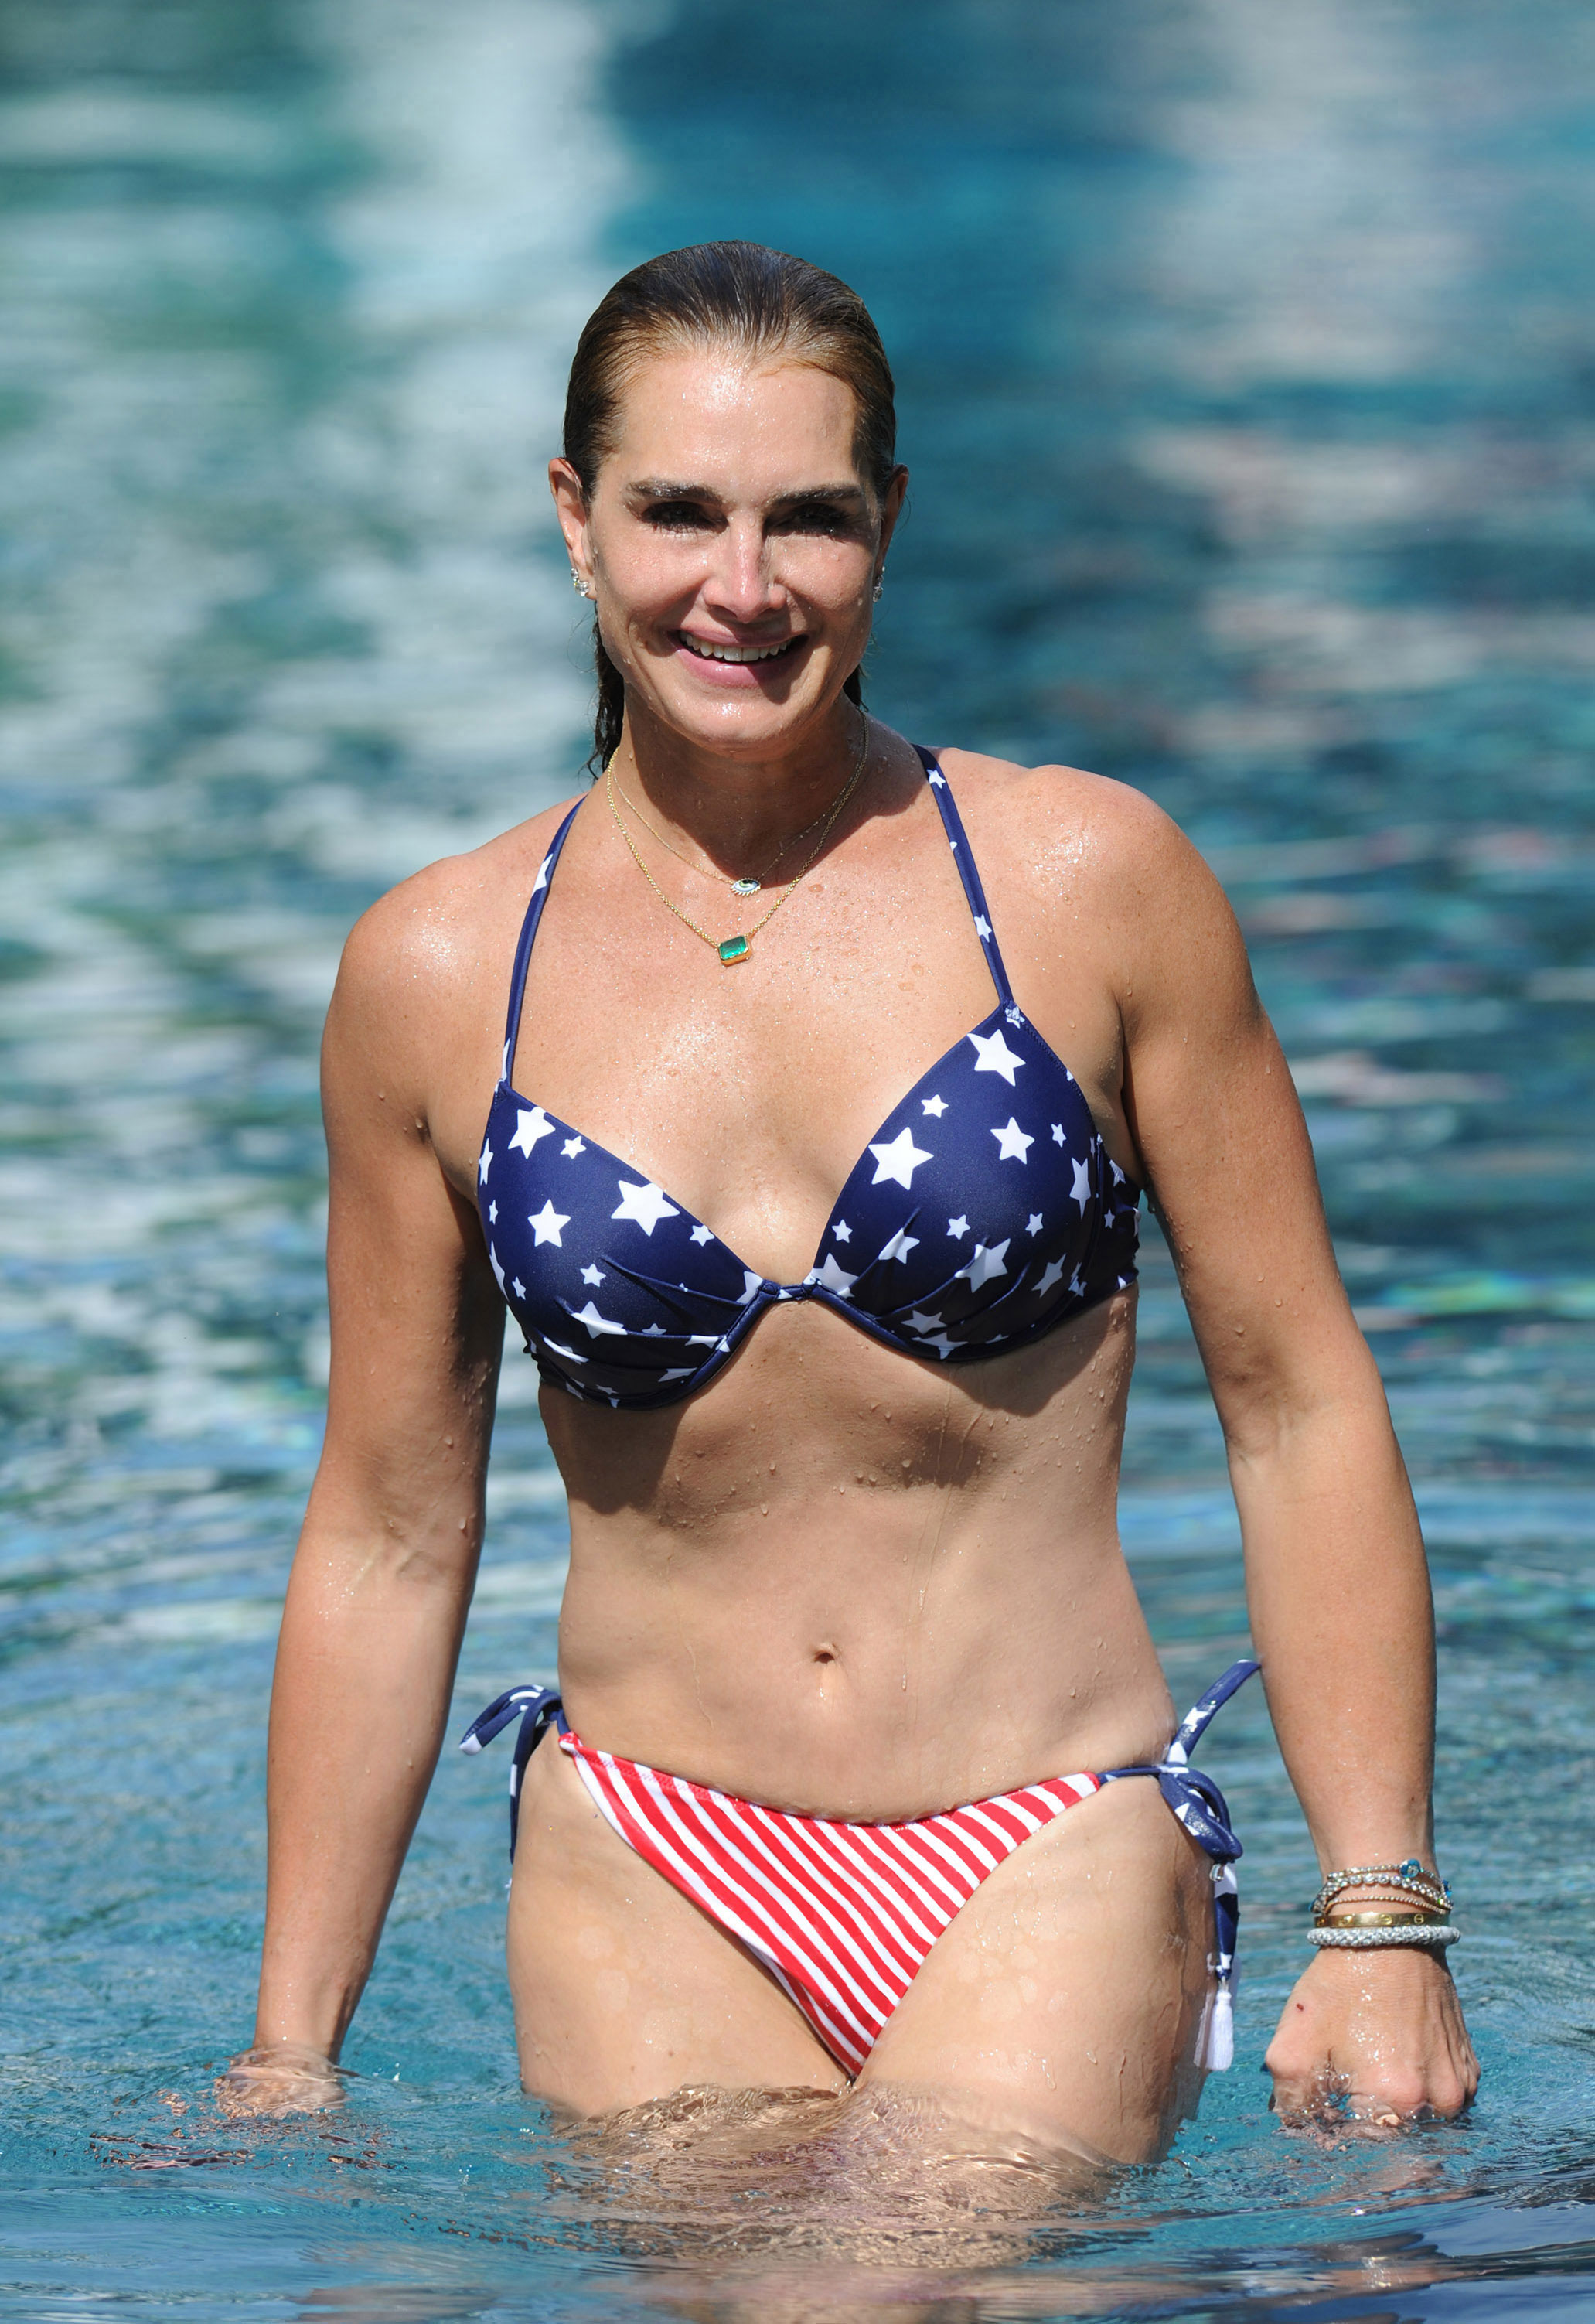 Stunning celebrities over 50 in bikinis and swimsuits